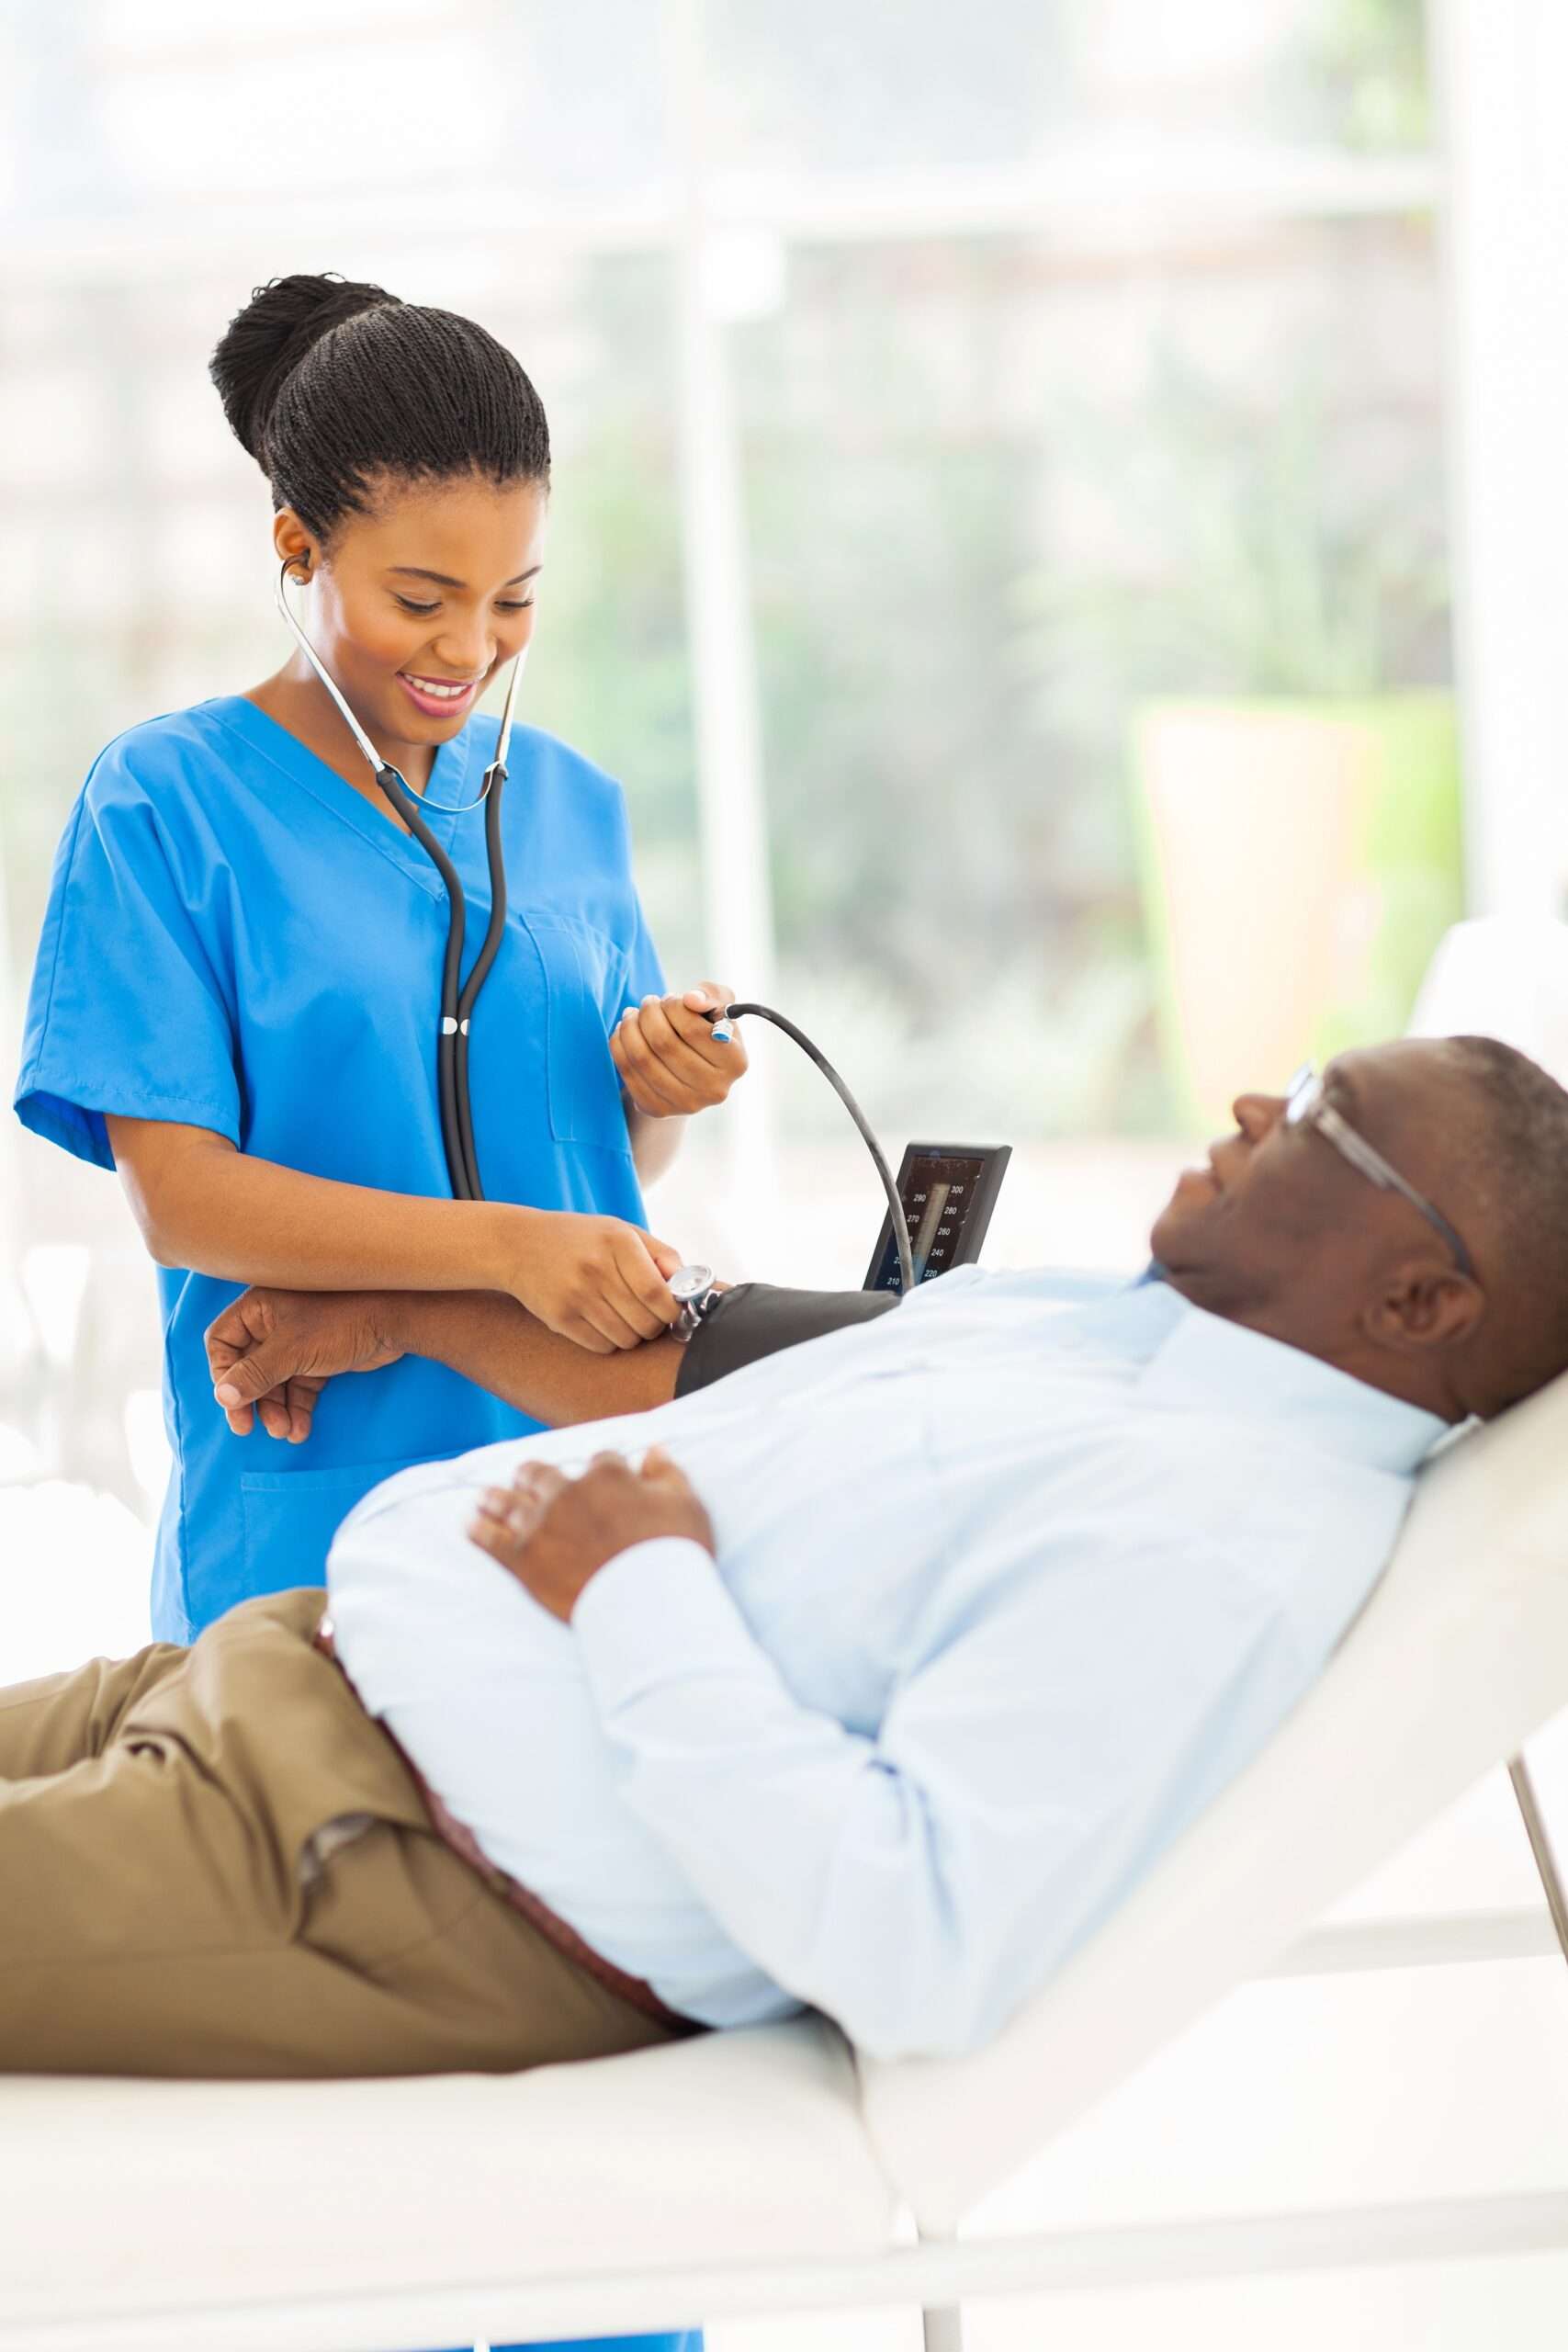 High Blood Pressure Video: & 6 Ways to Prevent It